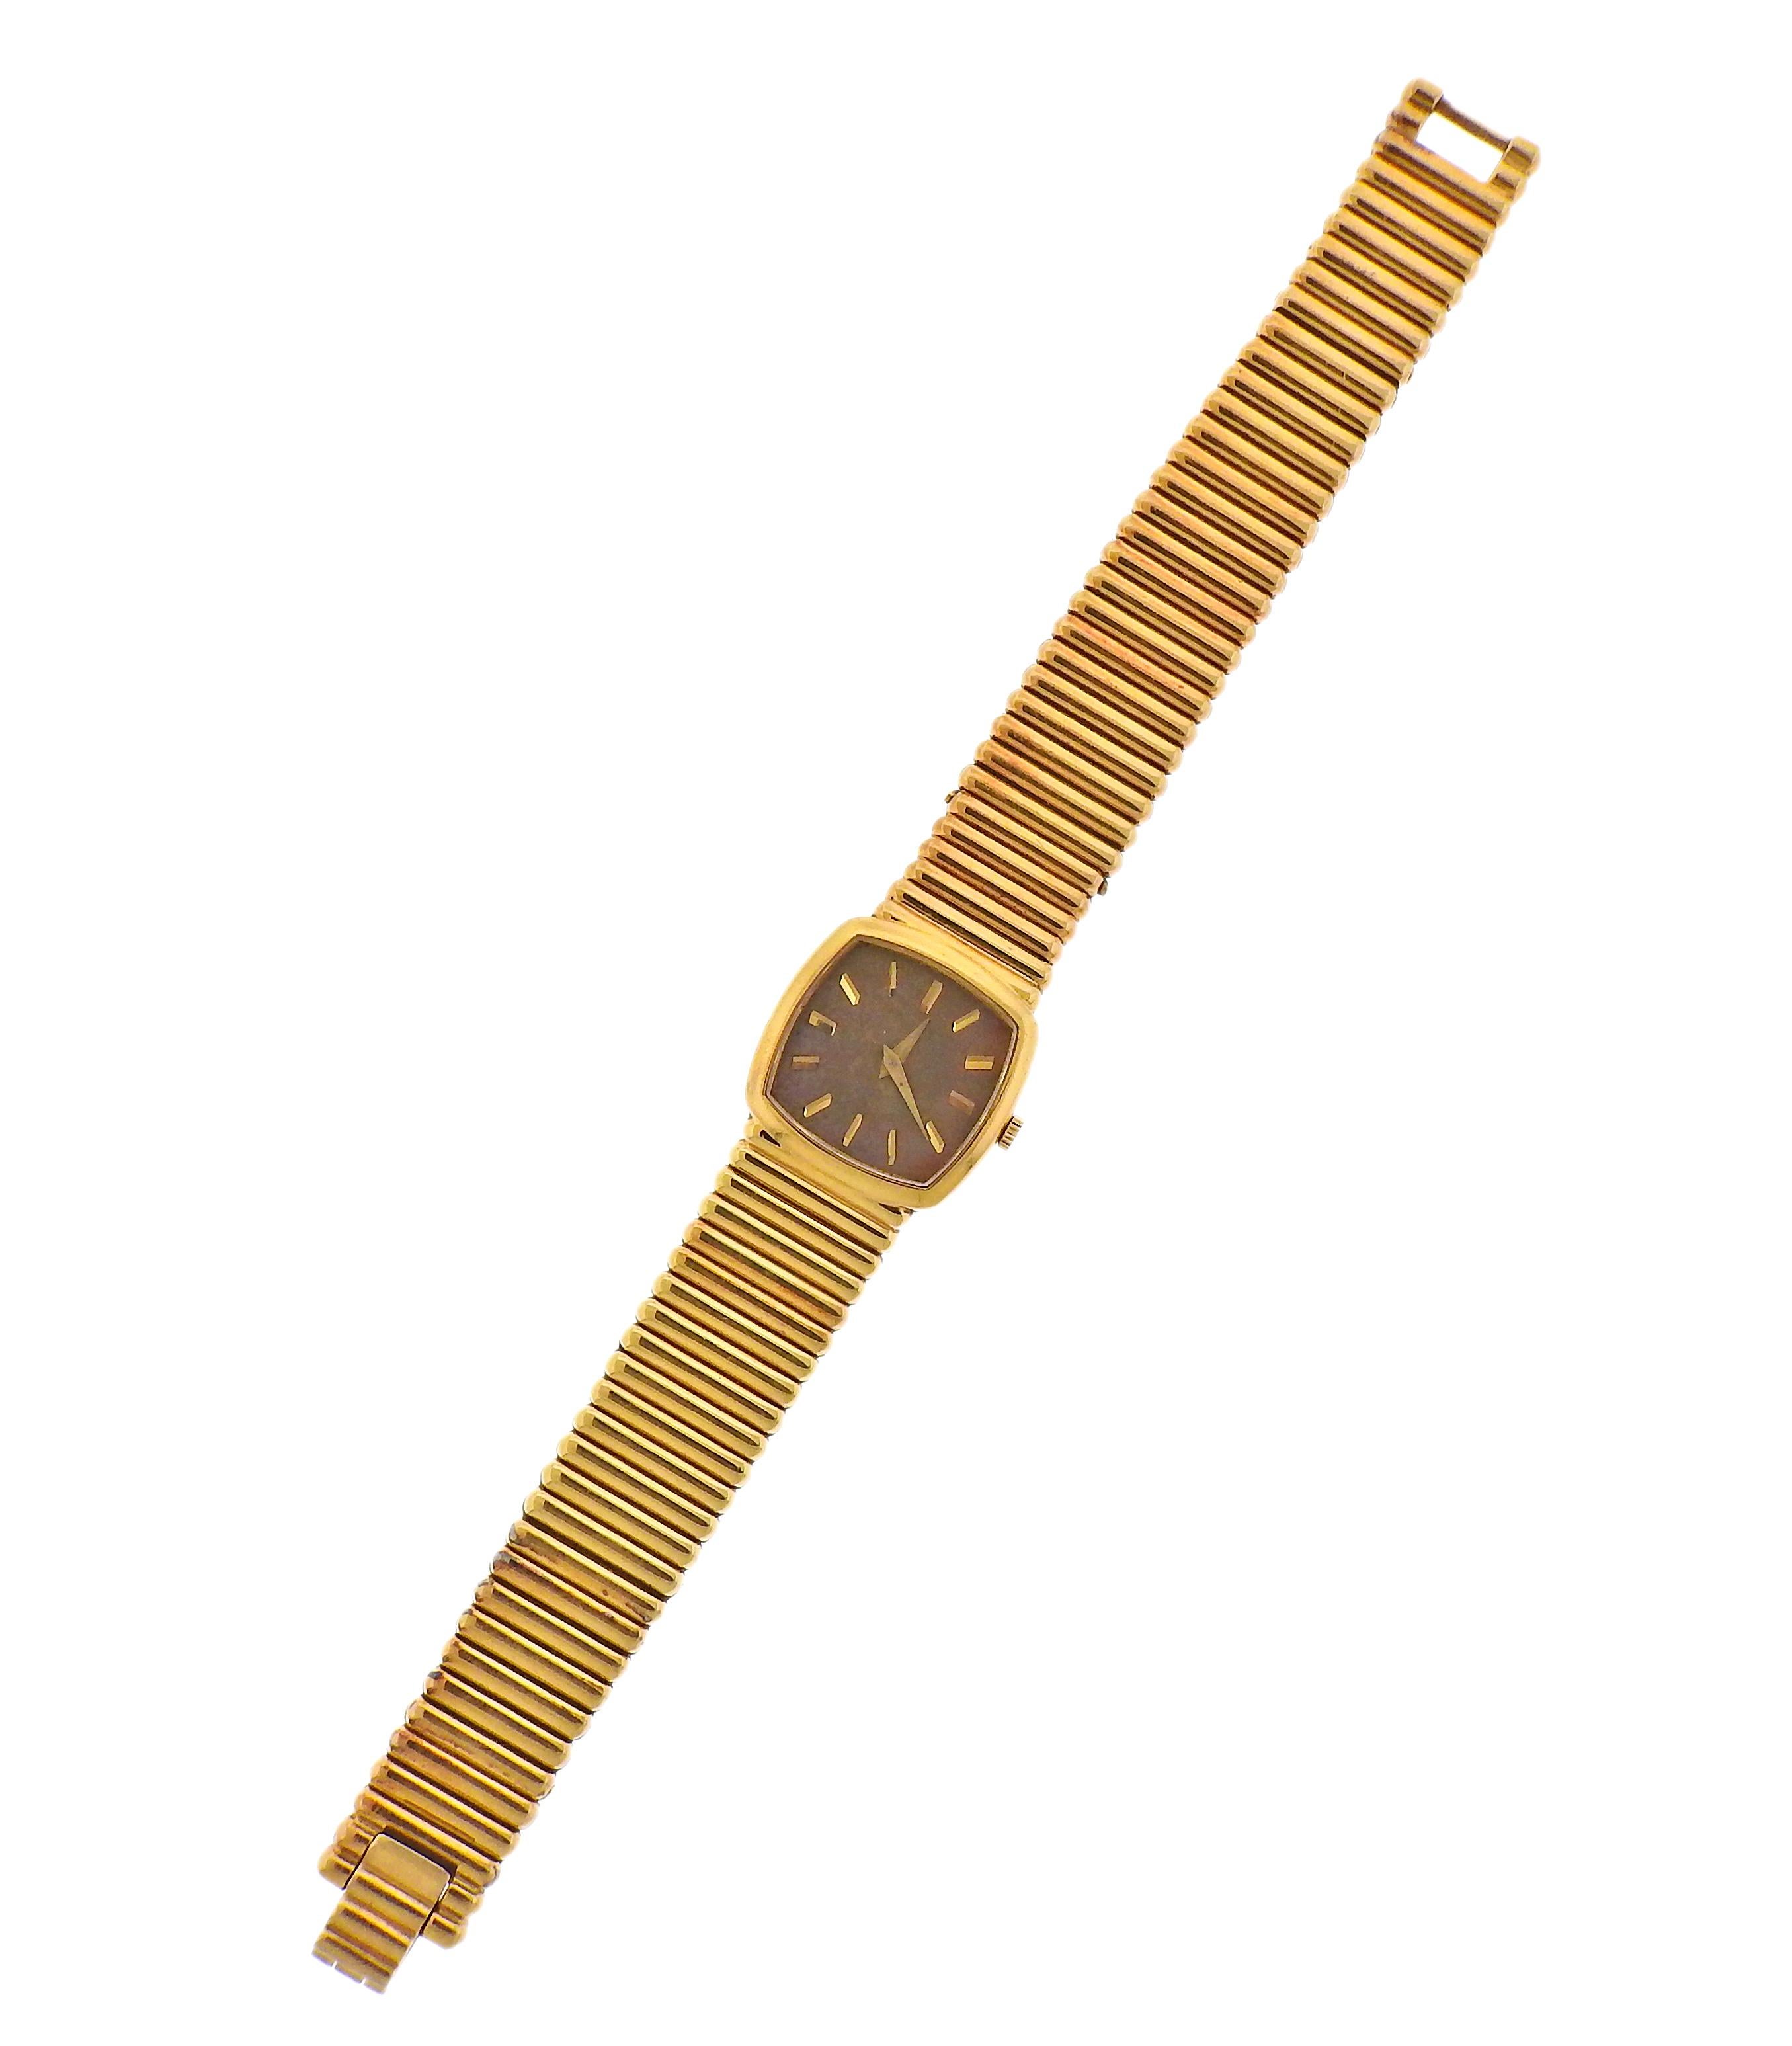 Vintage circa 1970s 18k gold watch bracelet by Piaget. Dial is discolored. Case - 23mm excl crown x 22mm. Bracelet is 7